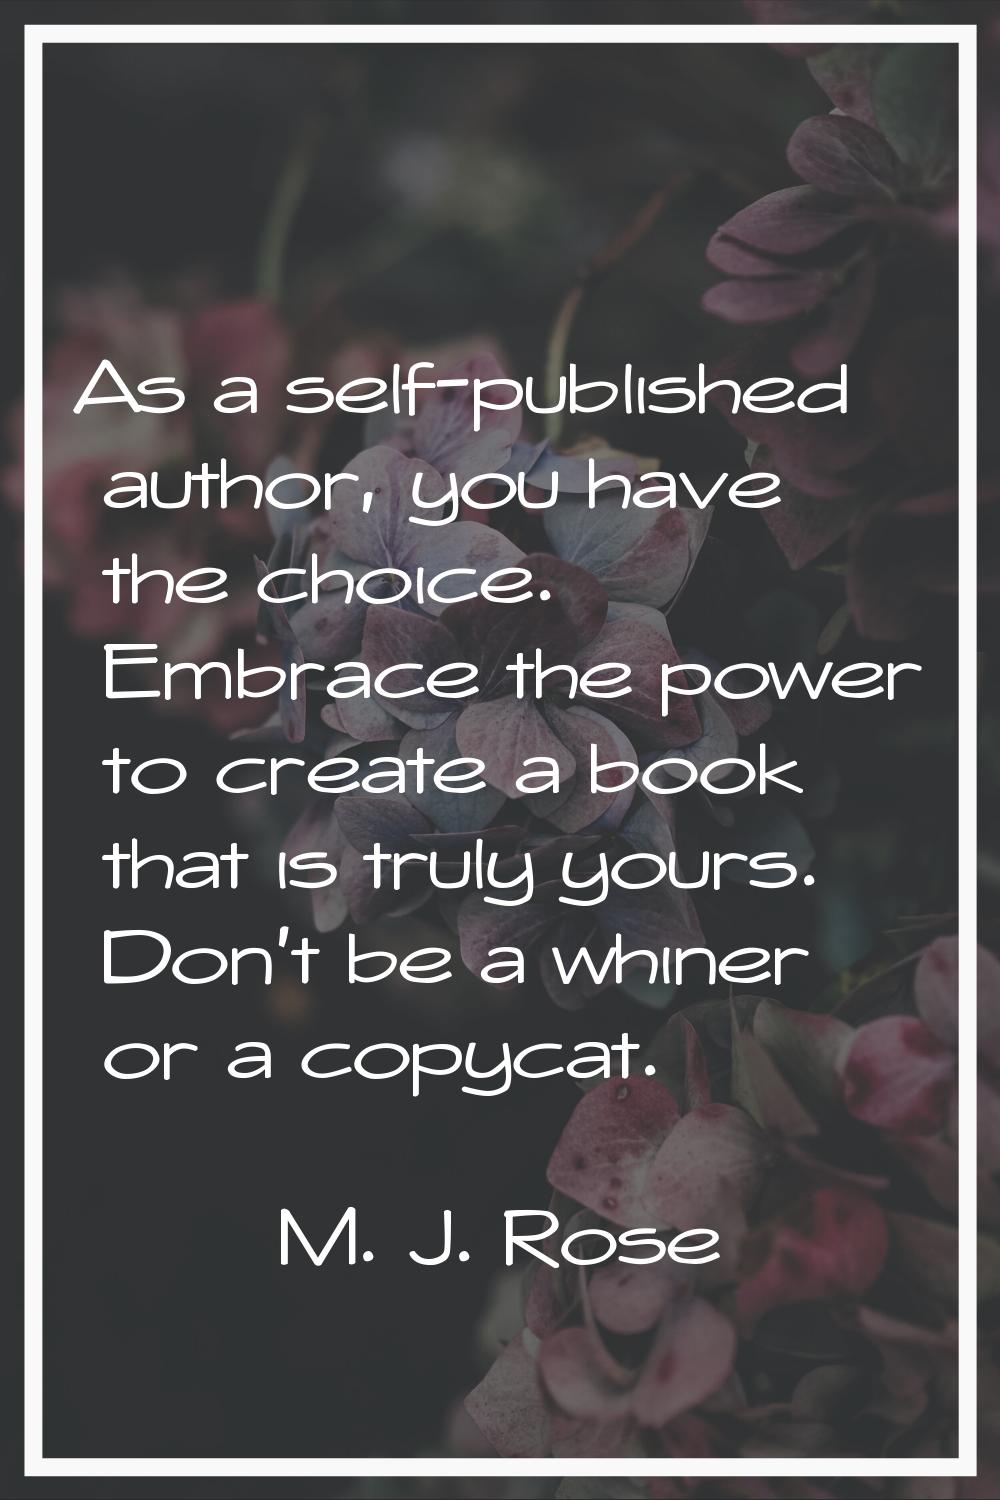 As a self-published author, you have the choice. Embrace the power to create a book that is truly y